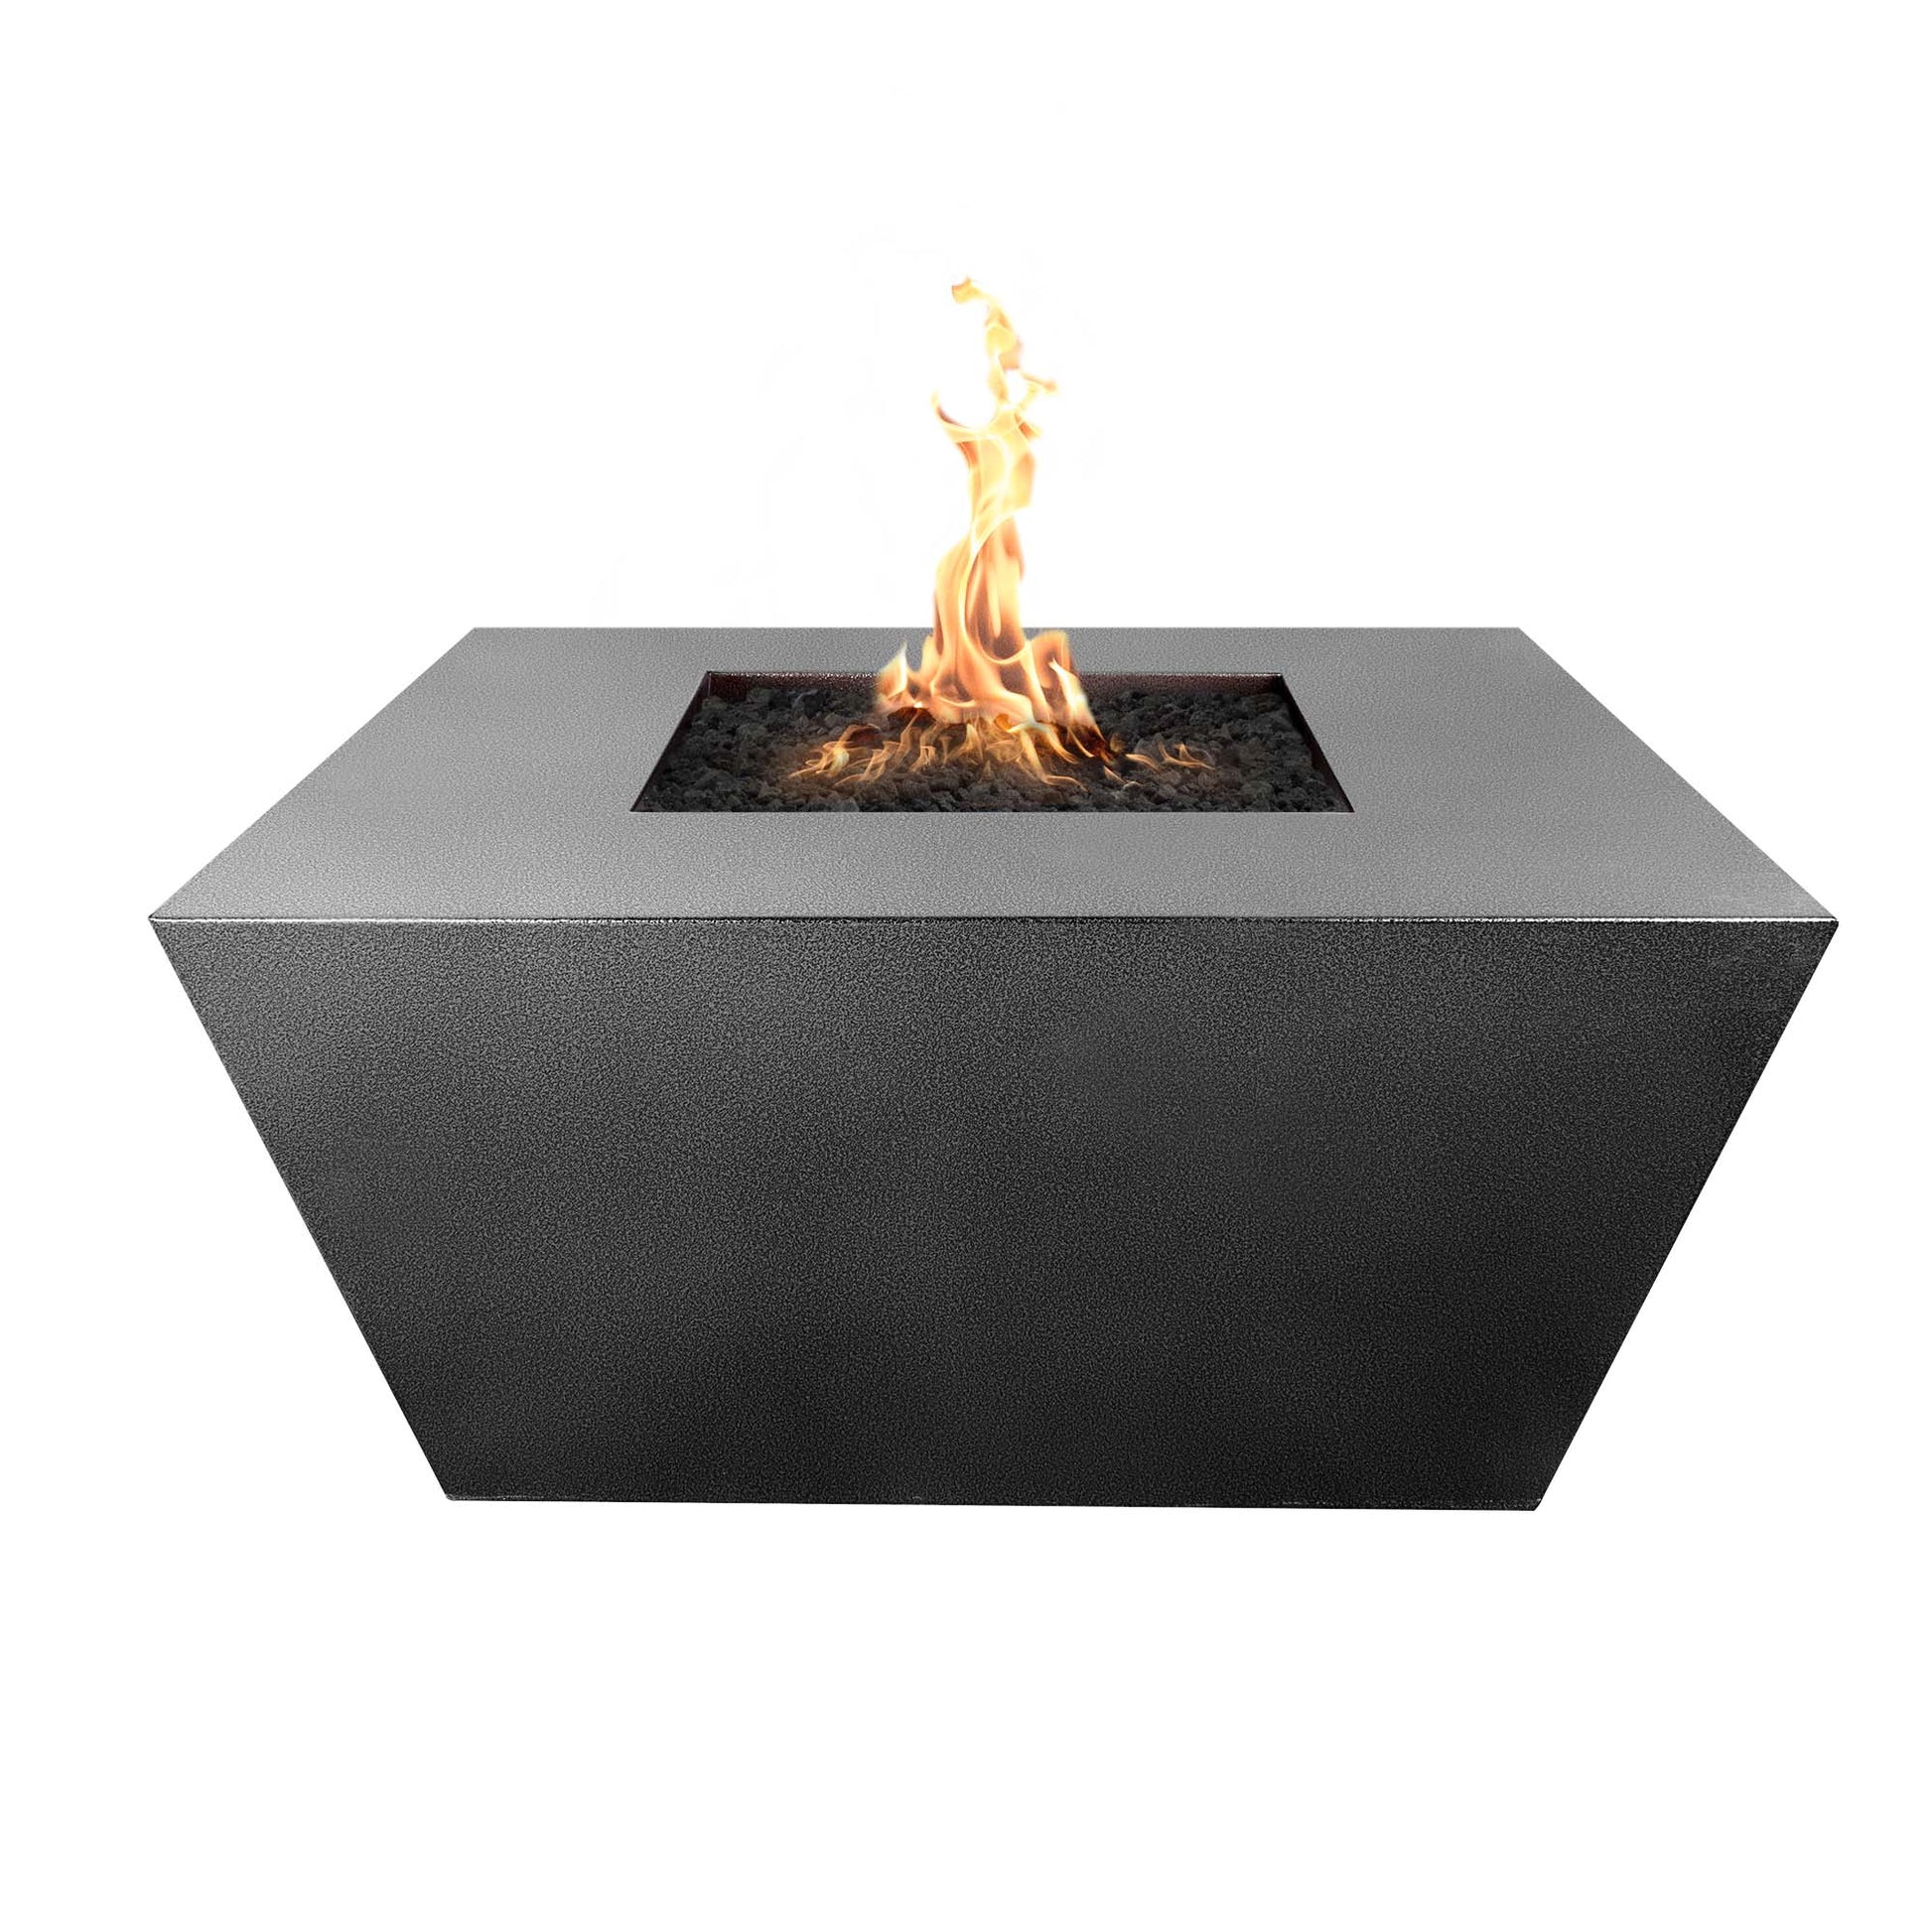 The Outdoor Plus Square Redan 36" Stainless Steel Natural Gas Fire Pit with Flame Sense with Spark Ignition